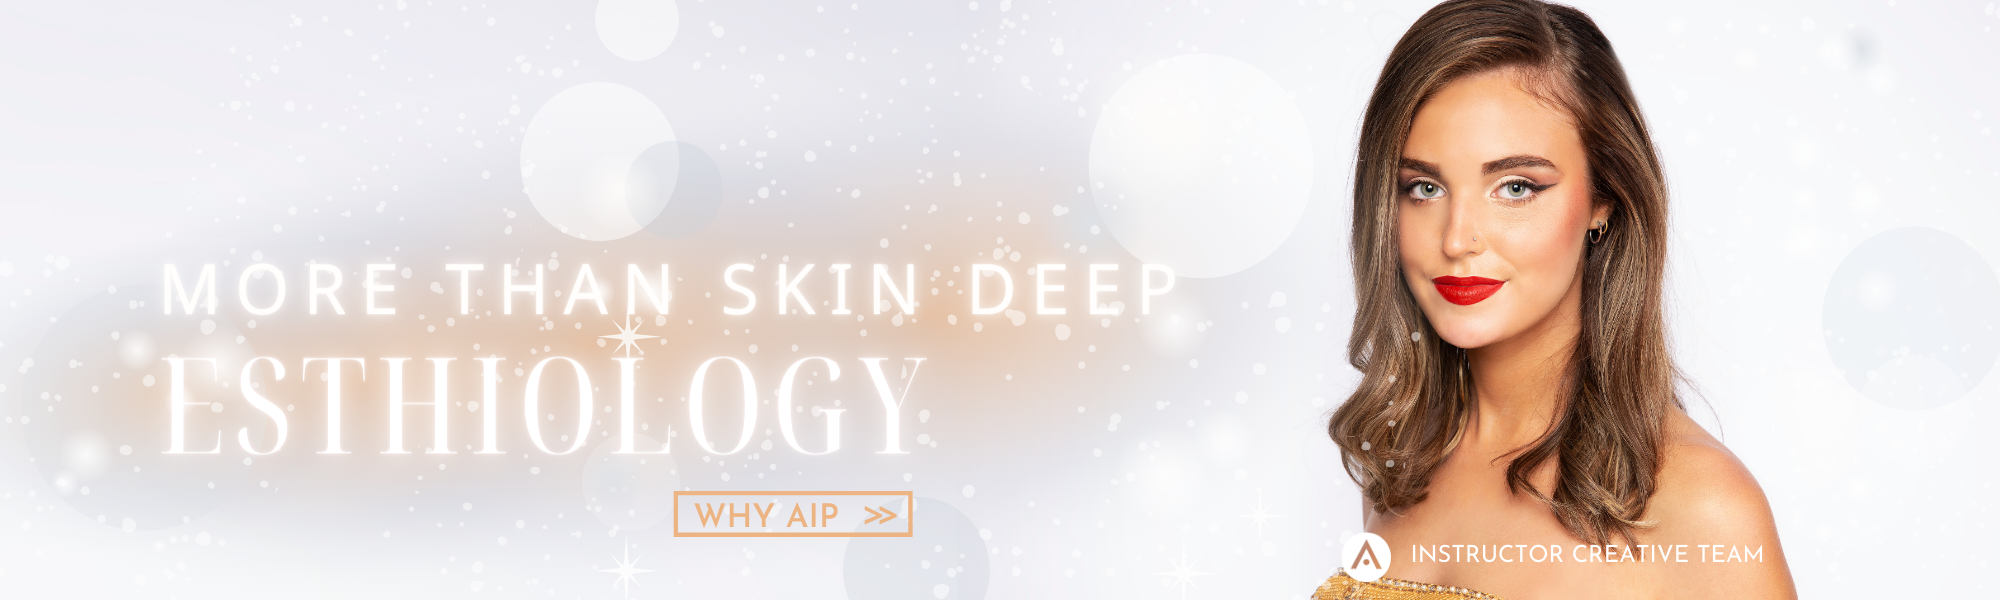 From the AIP Instructor Creative Team, a brunette model with modern sleek waves, bronzed makeup and a golden gown. More than skin deep, learn about the Esthiology program and why AIP.